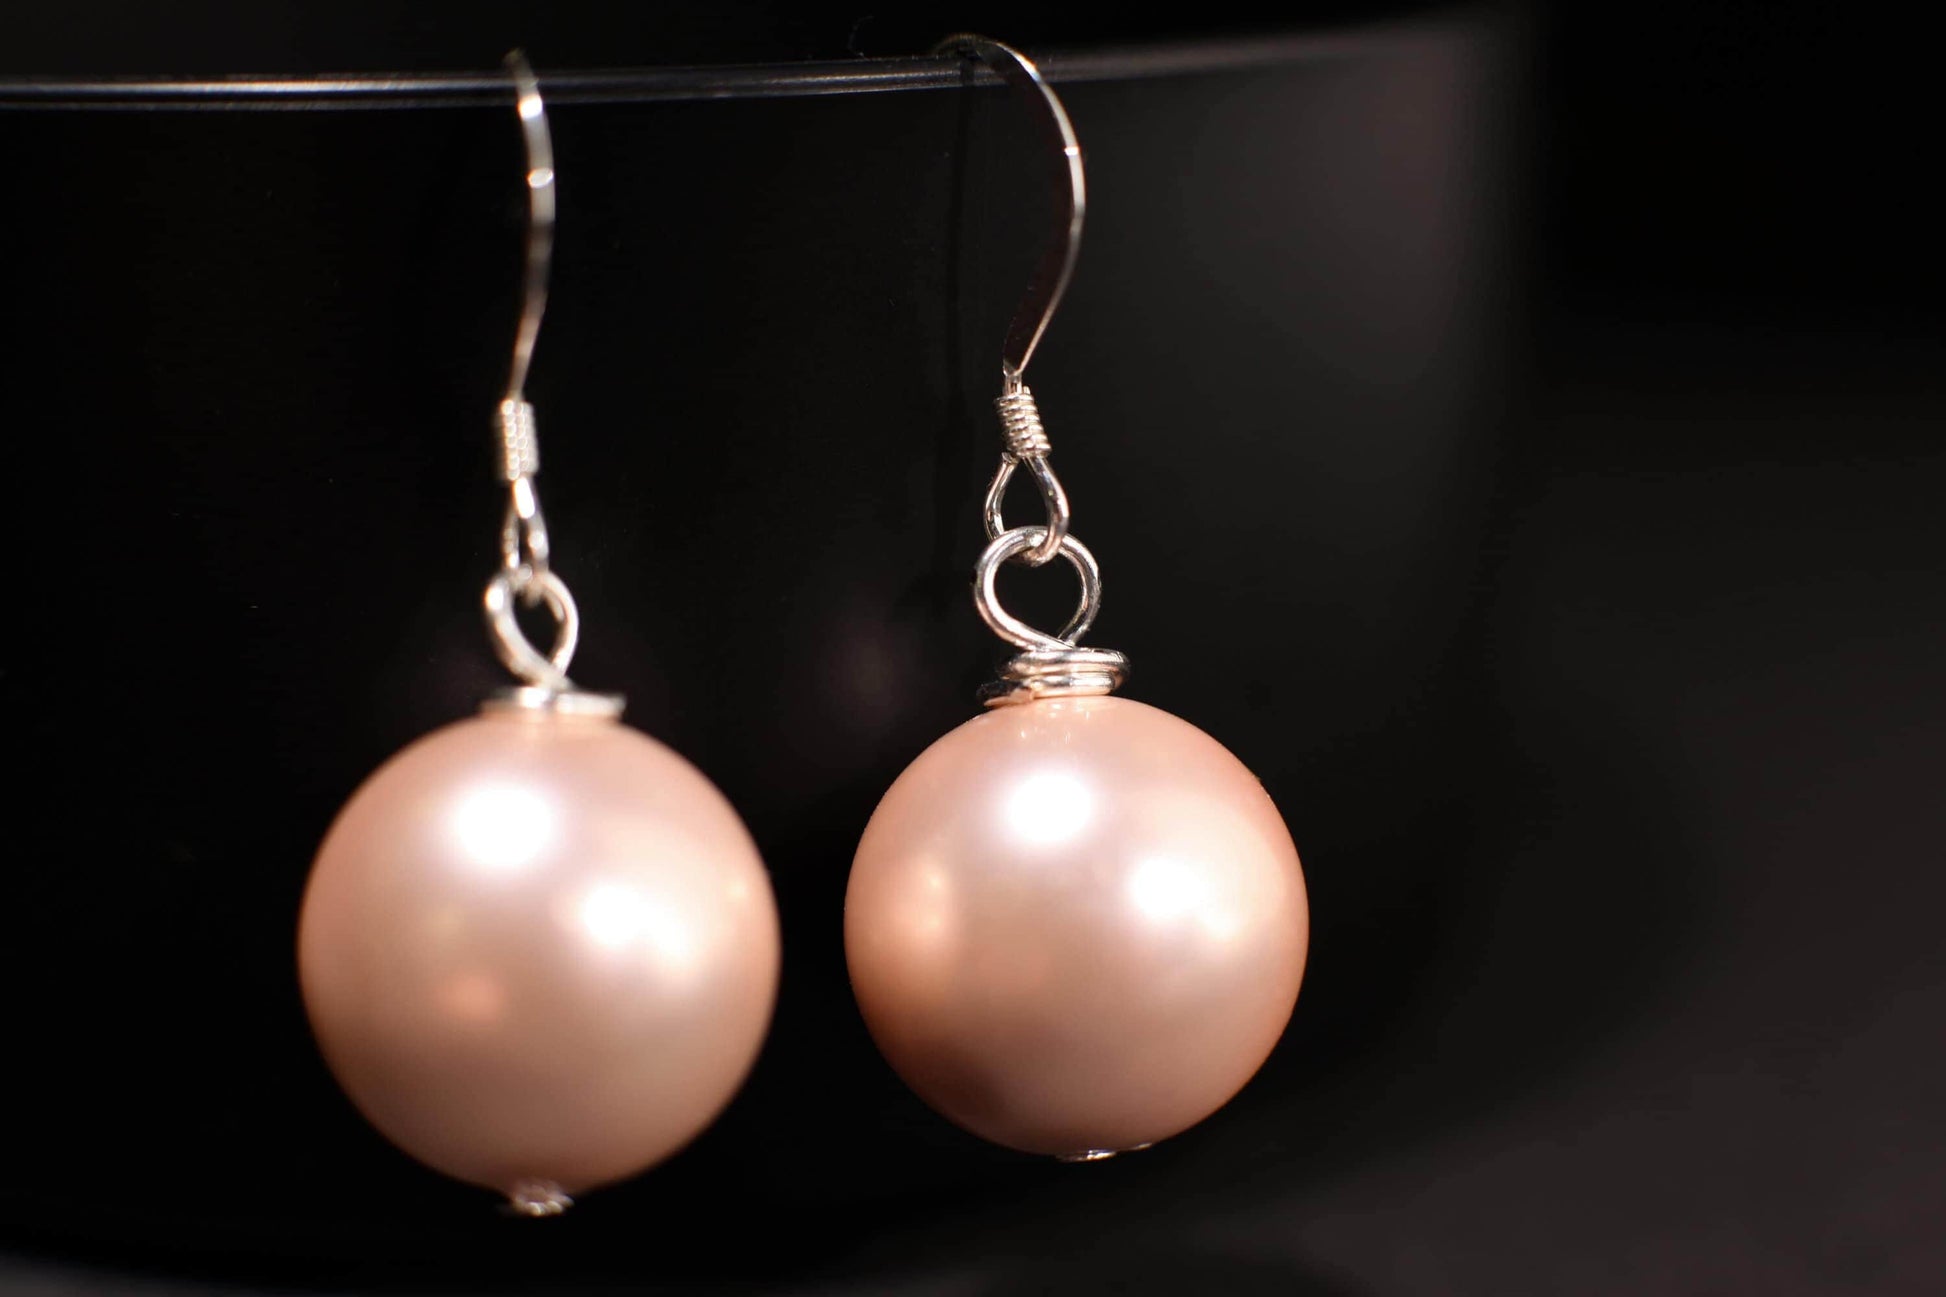 Pink South Sea Shell Pearl 14mm Large High Luster in 925 Sterling Silver Ear Wire or Leverback Earrings, Bridal, Gift for Her